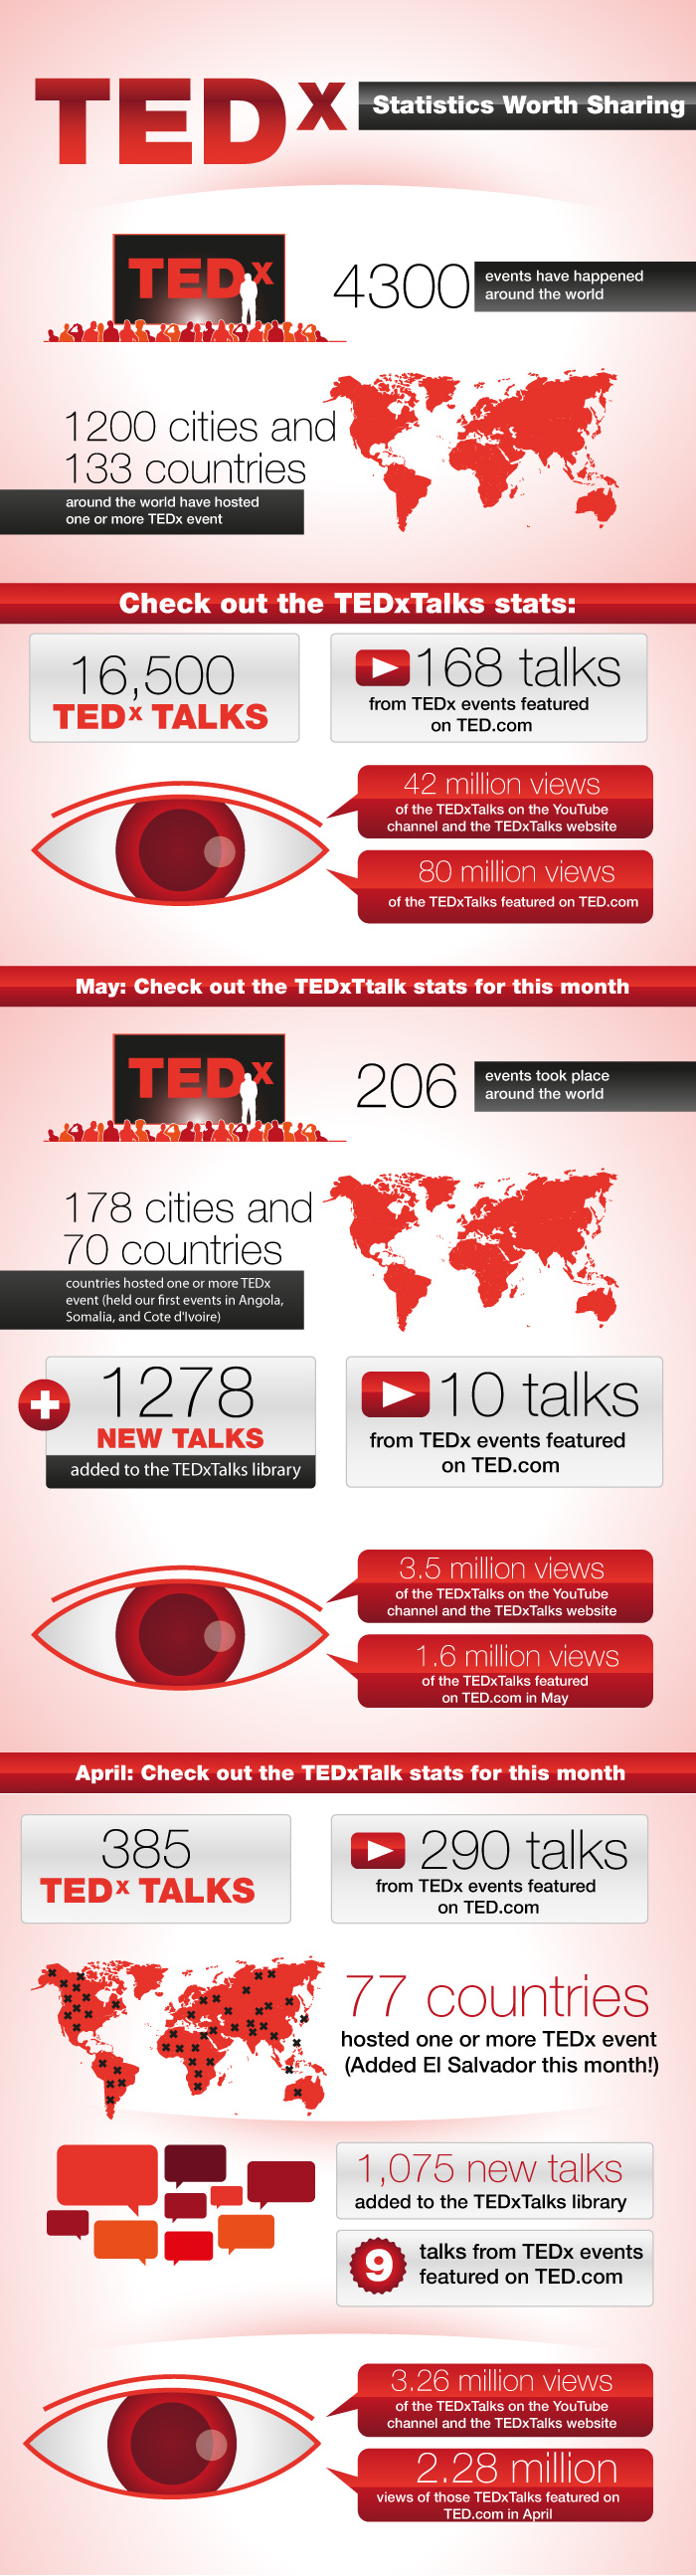 TED and TEDx: Statistics Worth Sharing